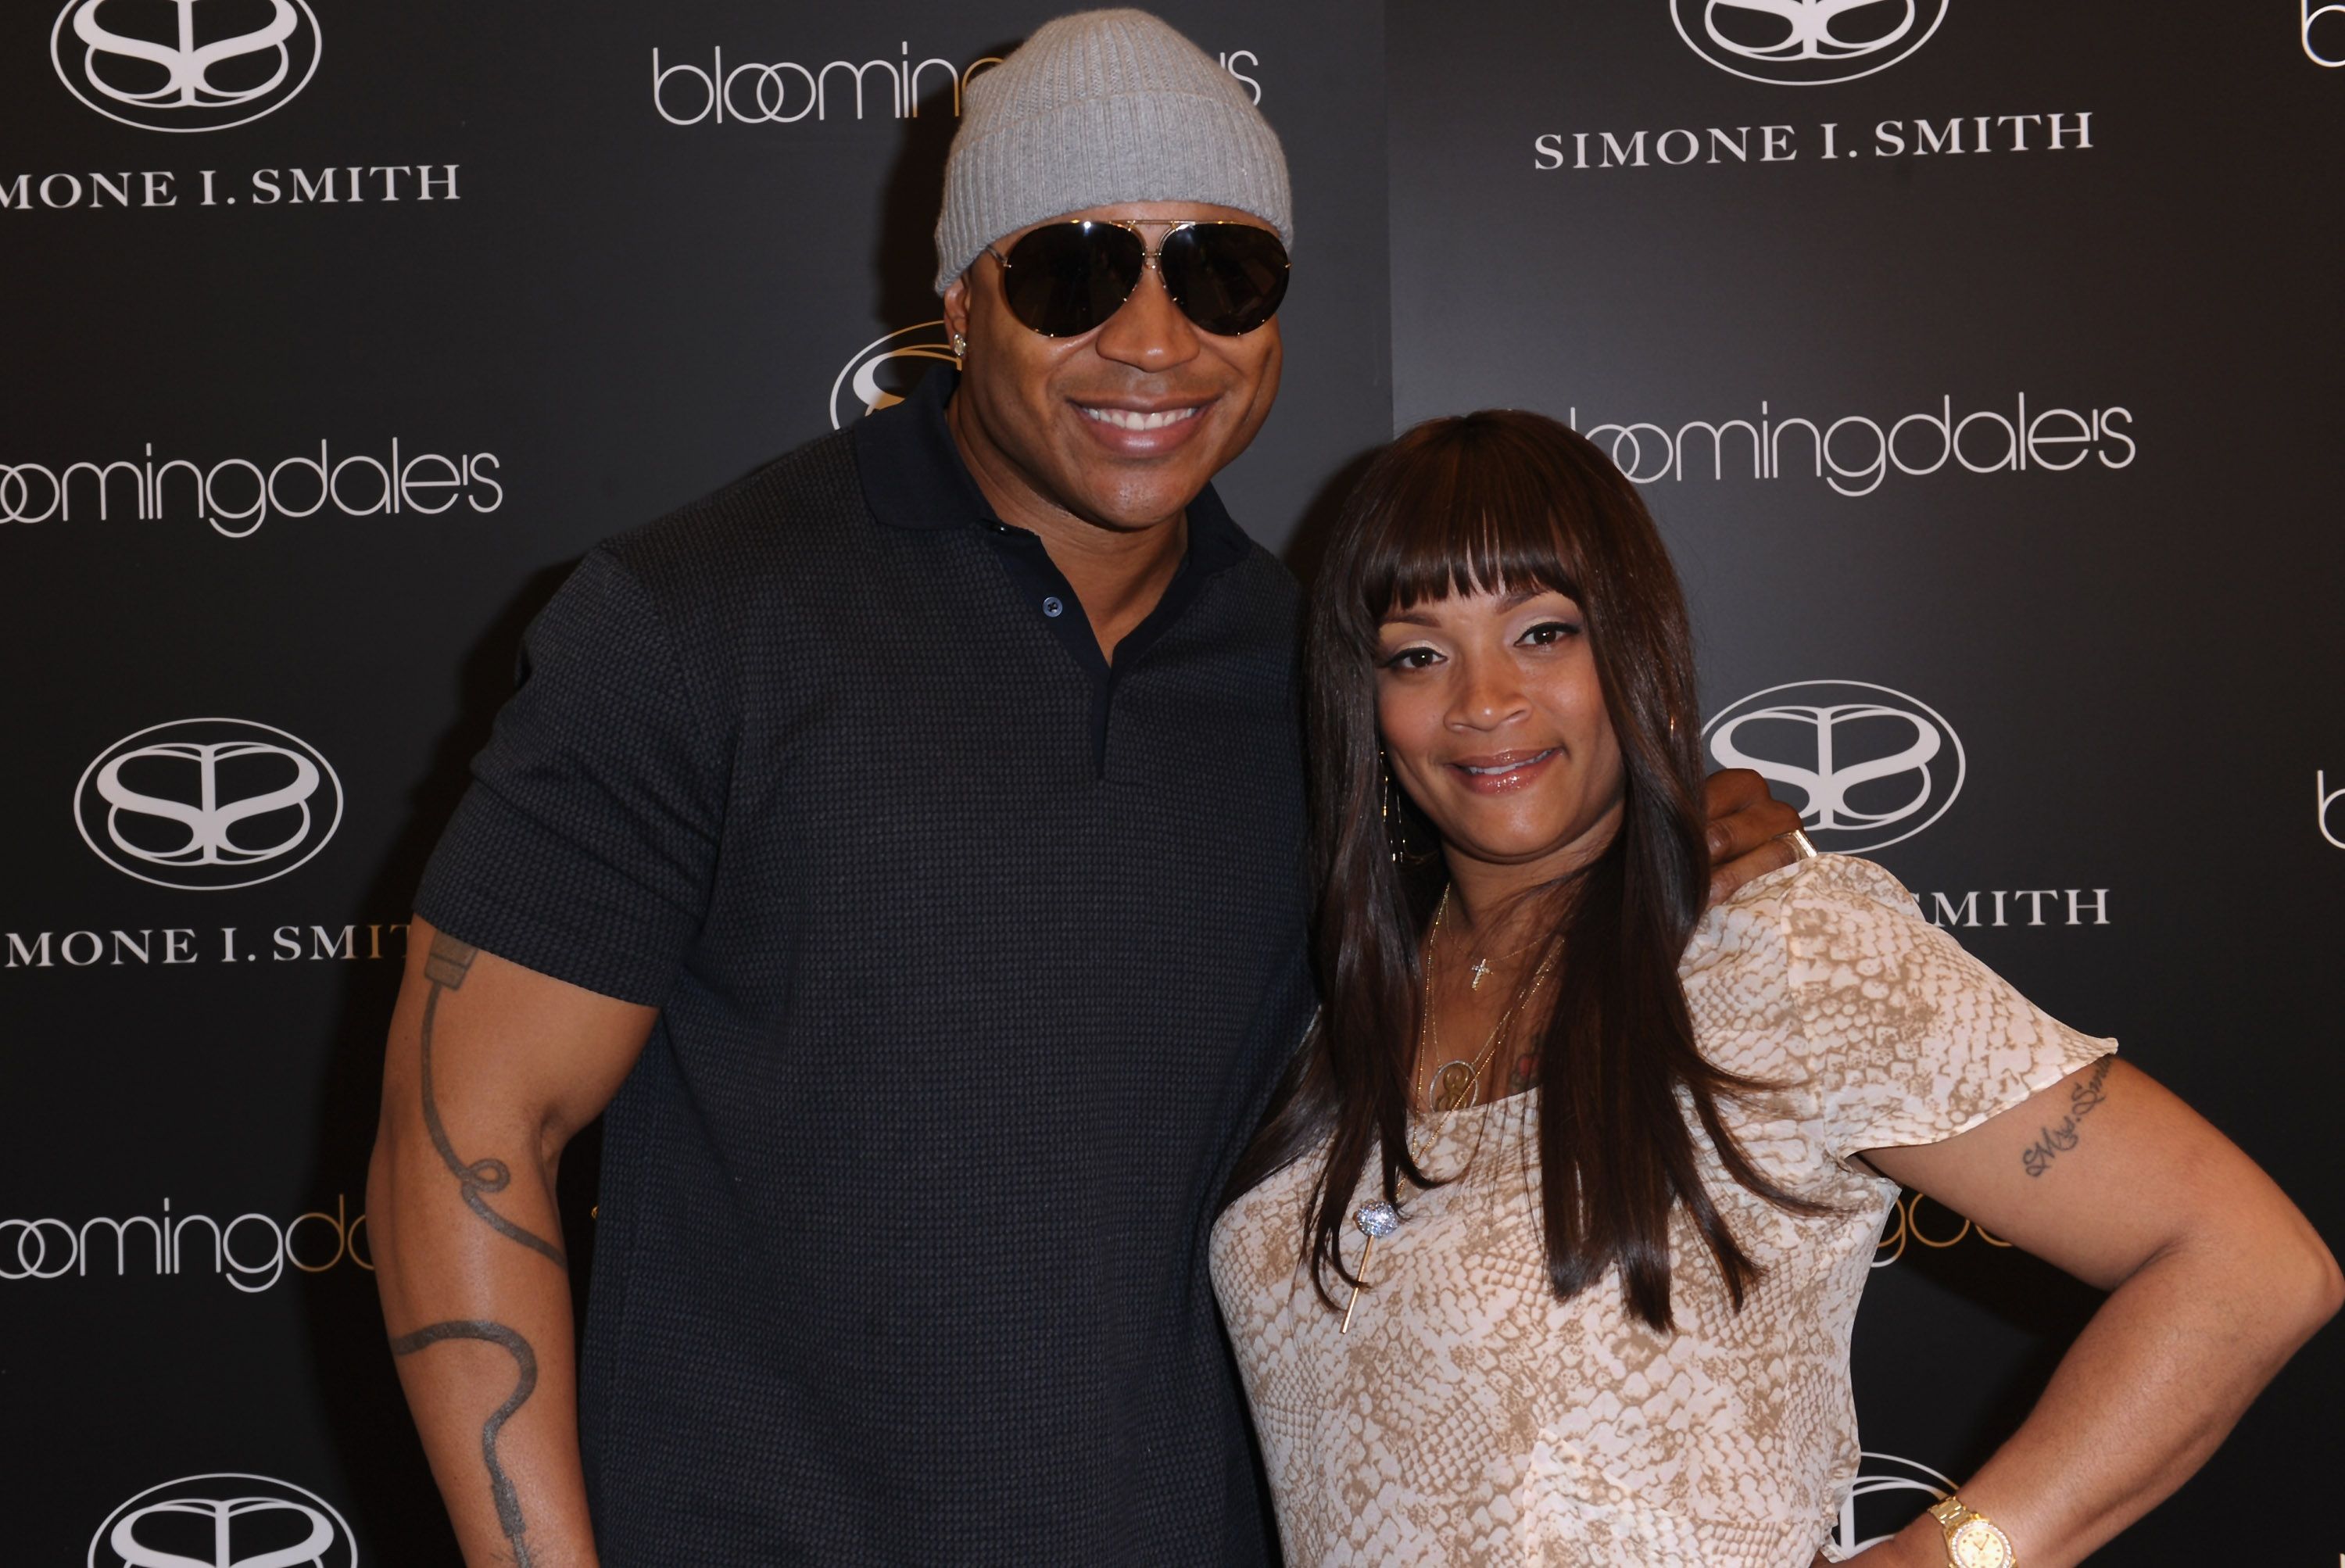  Actor LL Cool J and Simone I. Smith attend a personal appearance by Simone I. Smith at Bloomingdale's on May 12, 2011 in Century City, California | Photo: Getty Images